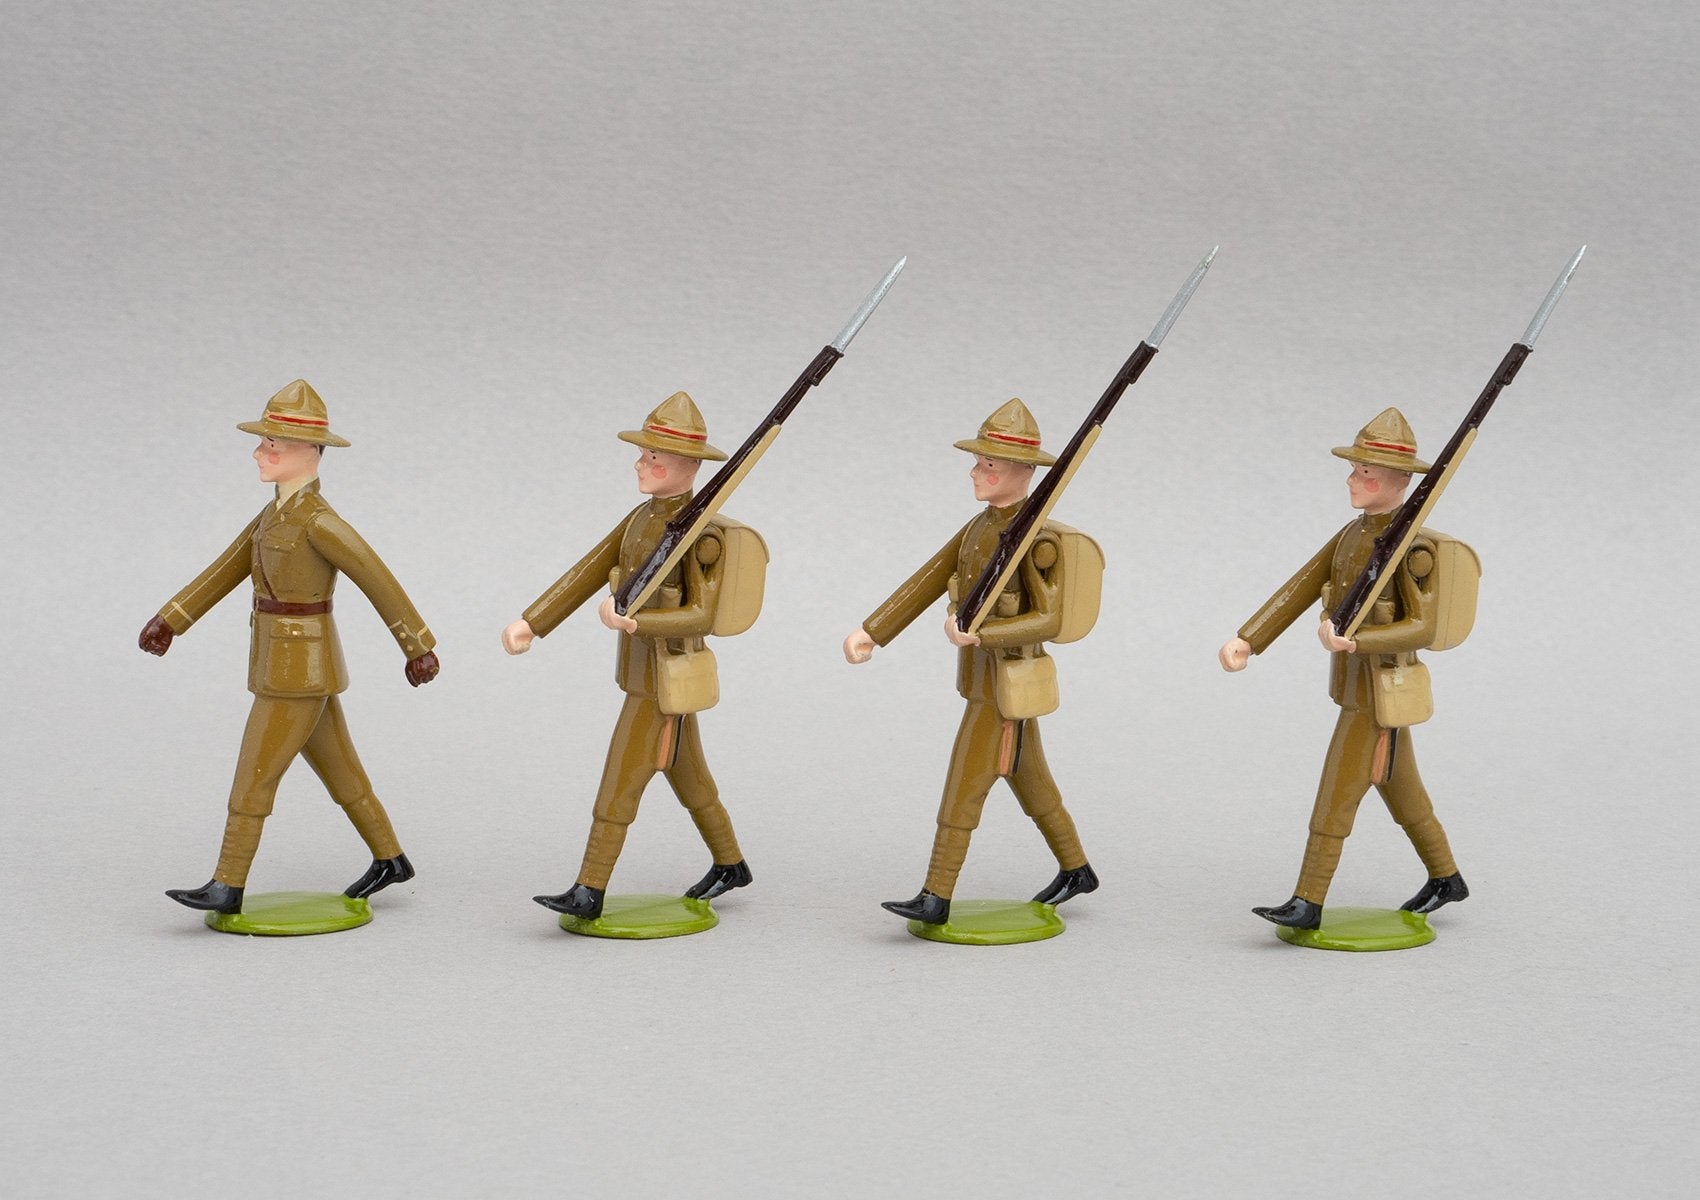 Set NZ4 NZ Infantry, France WWI | NZ Infantry | New Zealand | Set of four men, one officer, three men marching | WW1, Somme, Ypres, Arras, Western Front, Messines, Broodseinde, Passchendaele, Bapaume, Le Quesnoy | © Imperial Productions | Sculpt by David Cowe